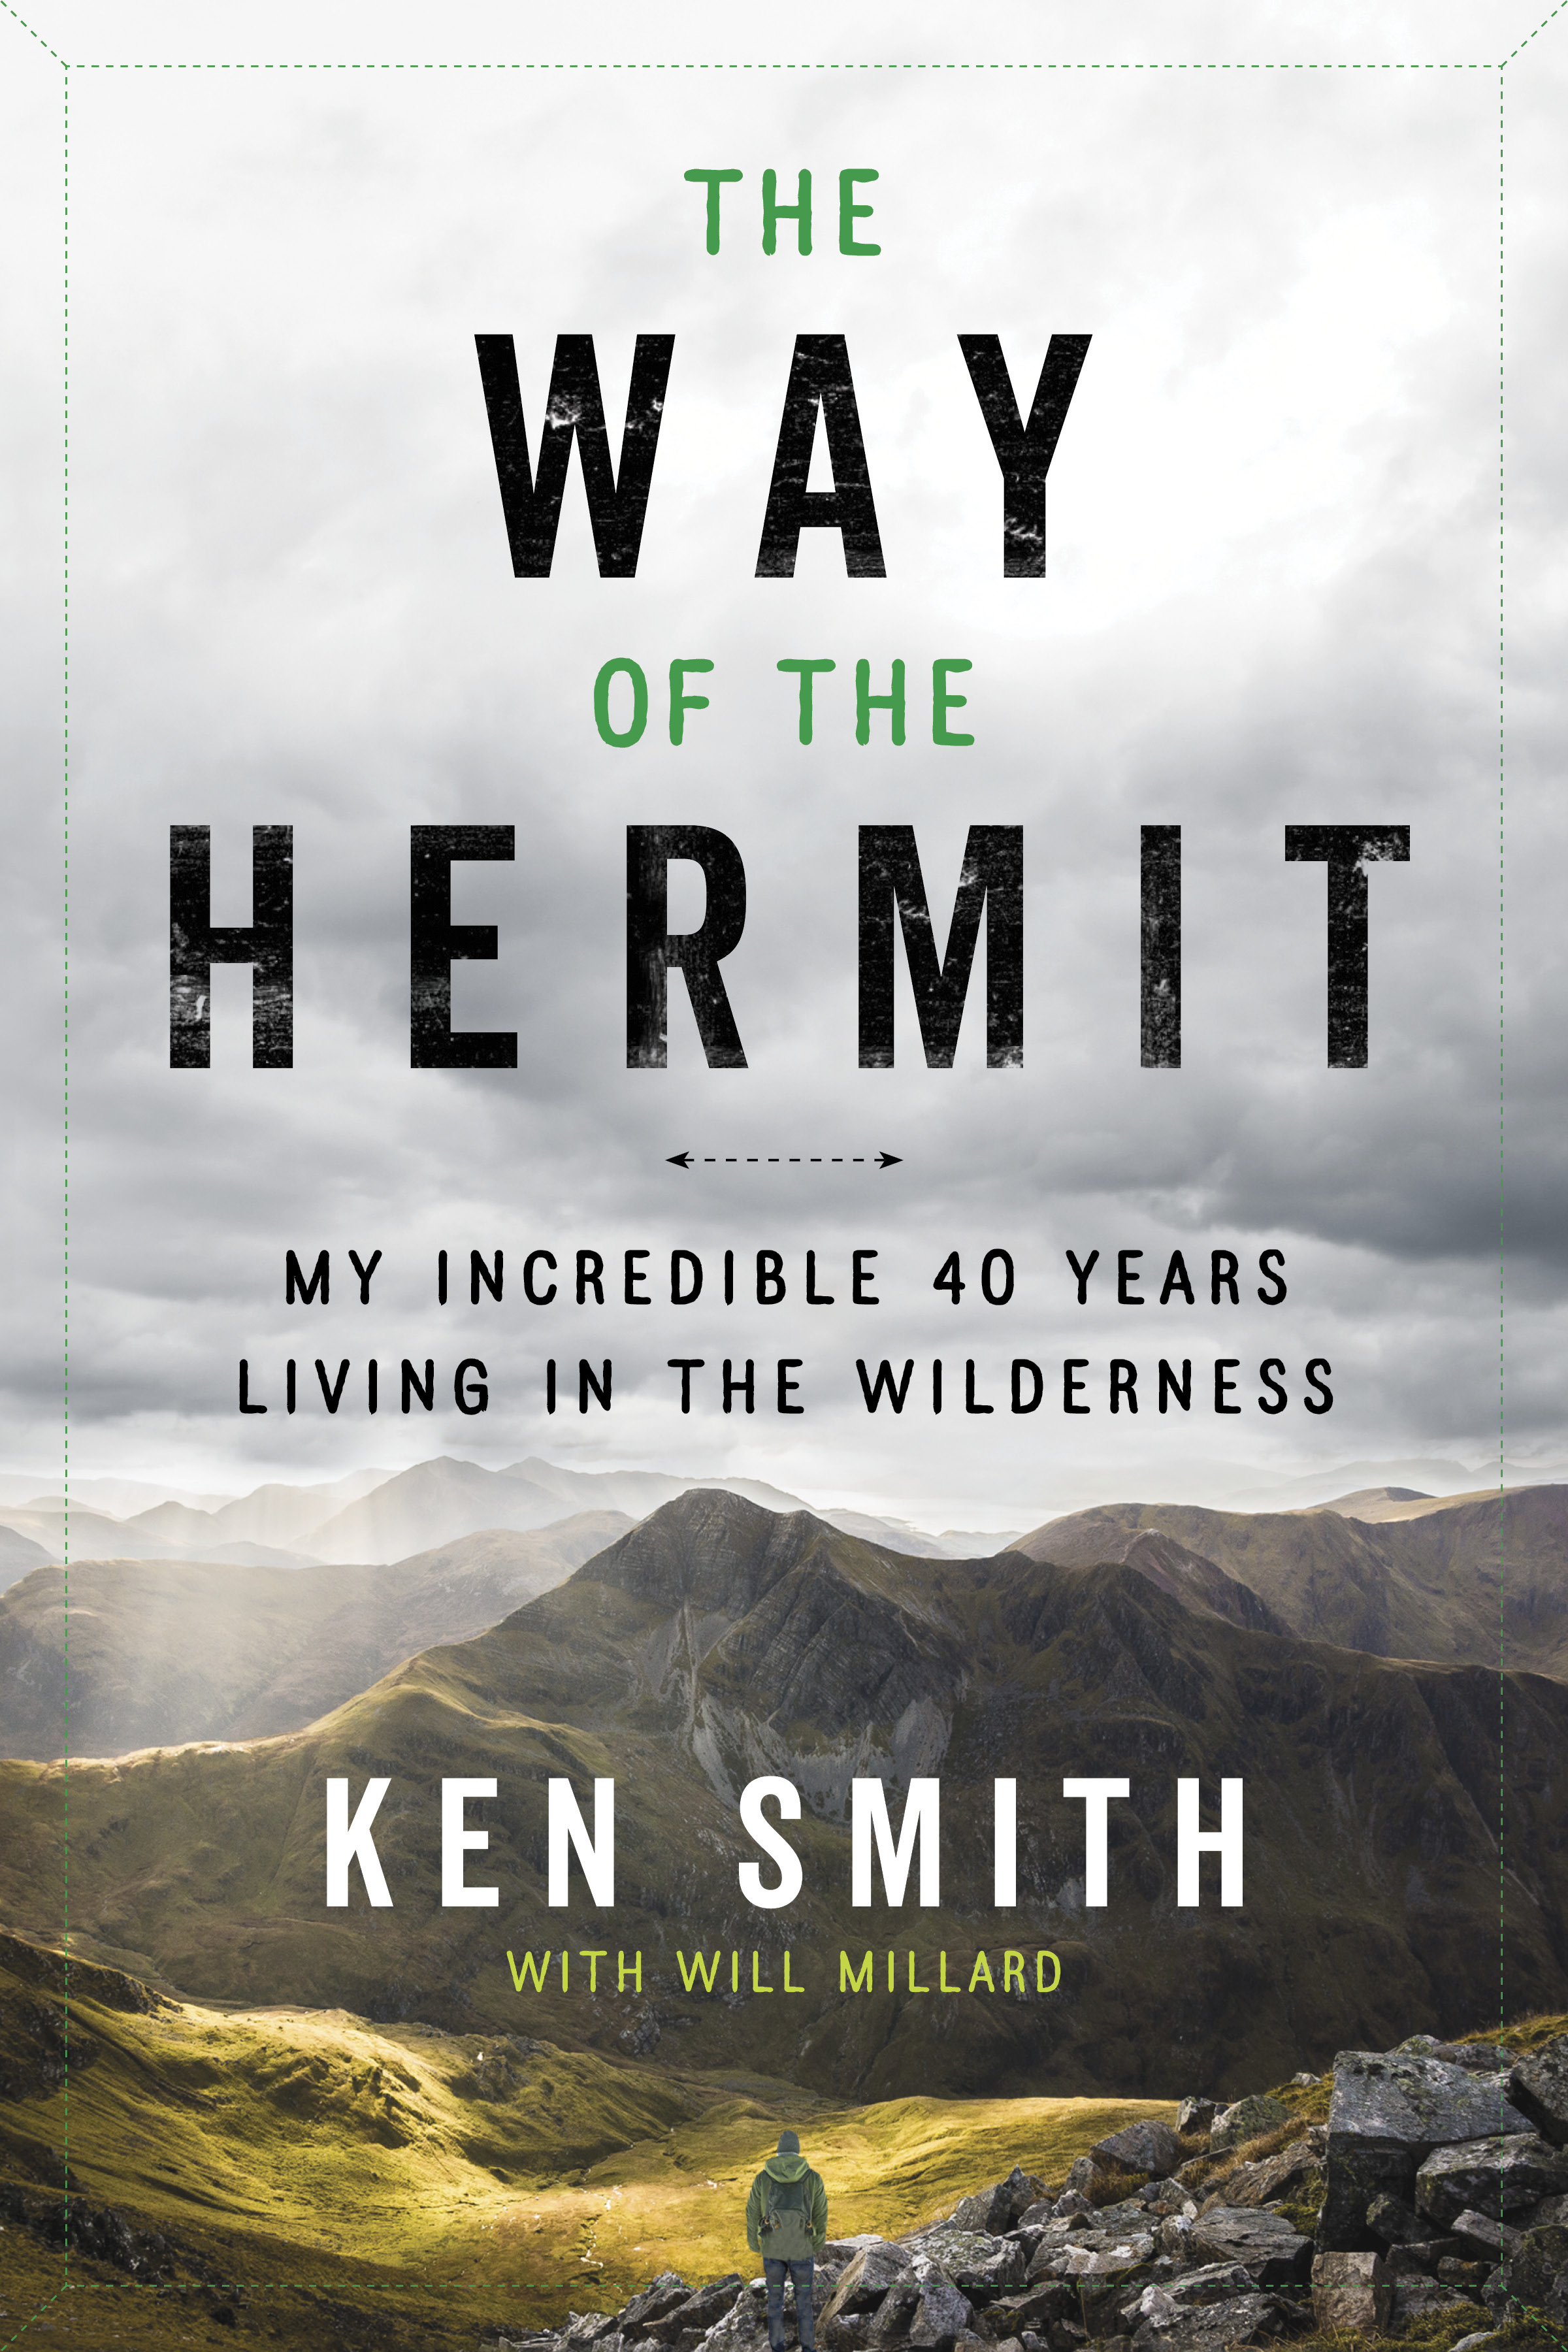 The book cover of "The Way of the Hermit."